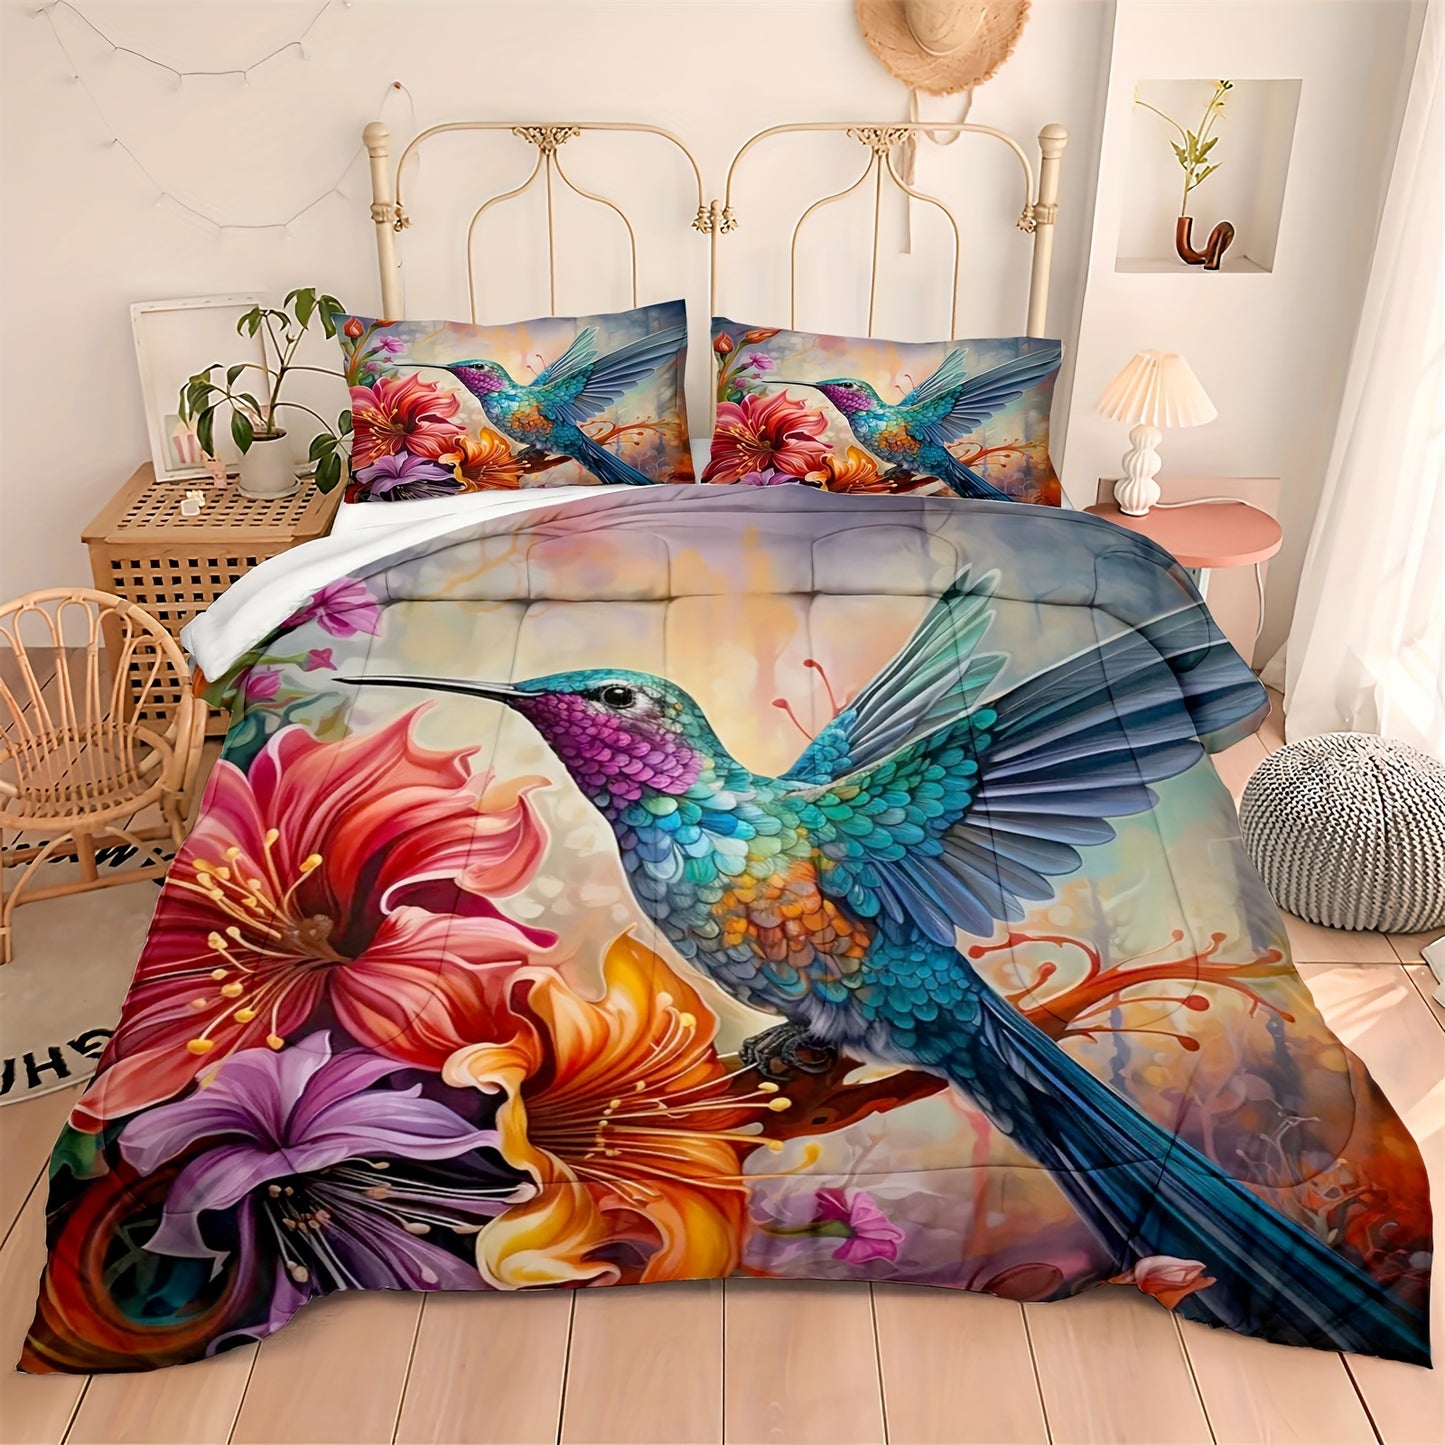 3pcs 100% Polyester Comforter Set (1*Comforter + 2*Pillowcase, Without Core), Aesthetic Flower And Bird Print Decorative Bedding Set, Soft Comfortable And Skin-friendly Comforter For Bedroom, Guest Room